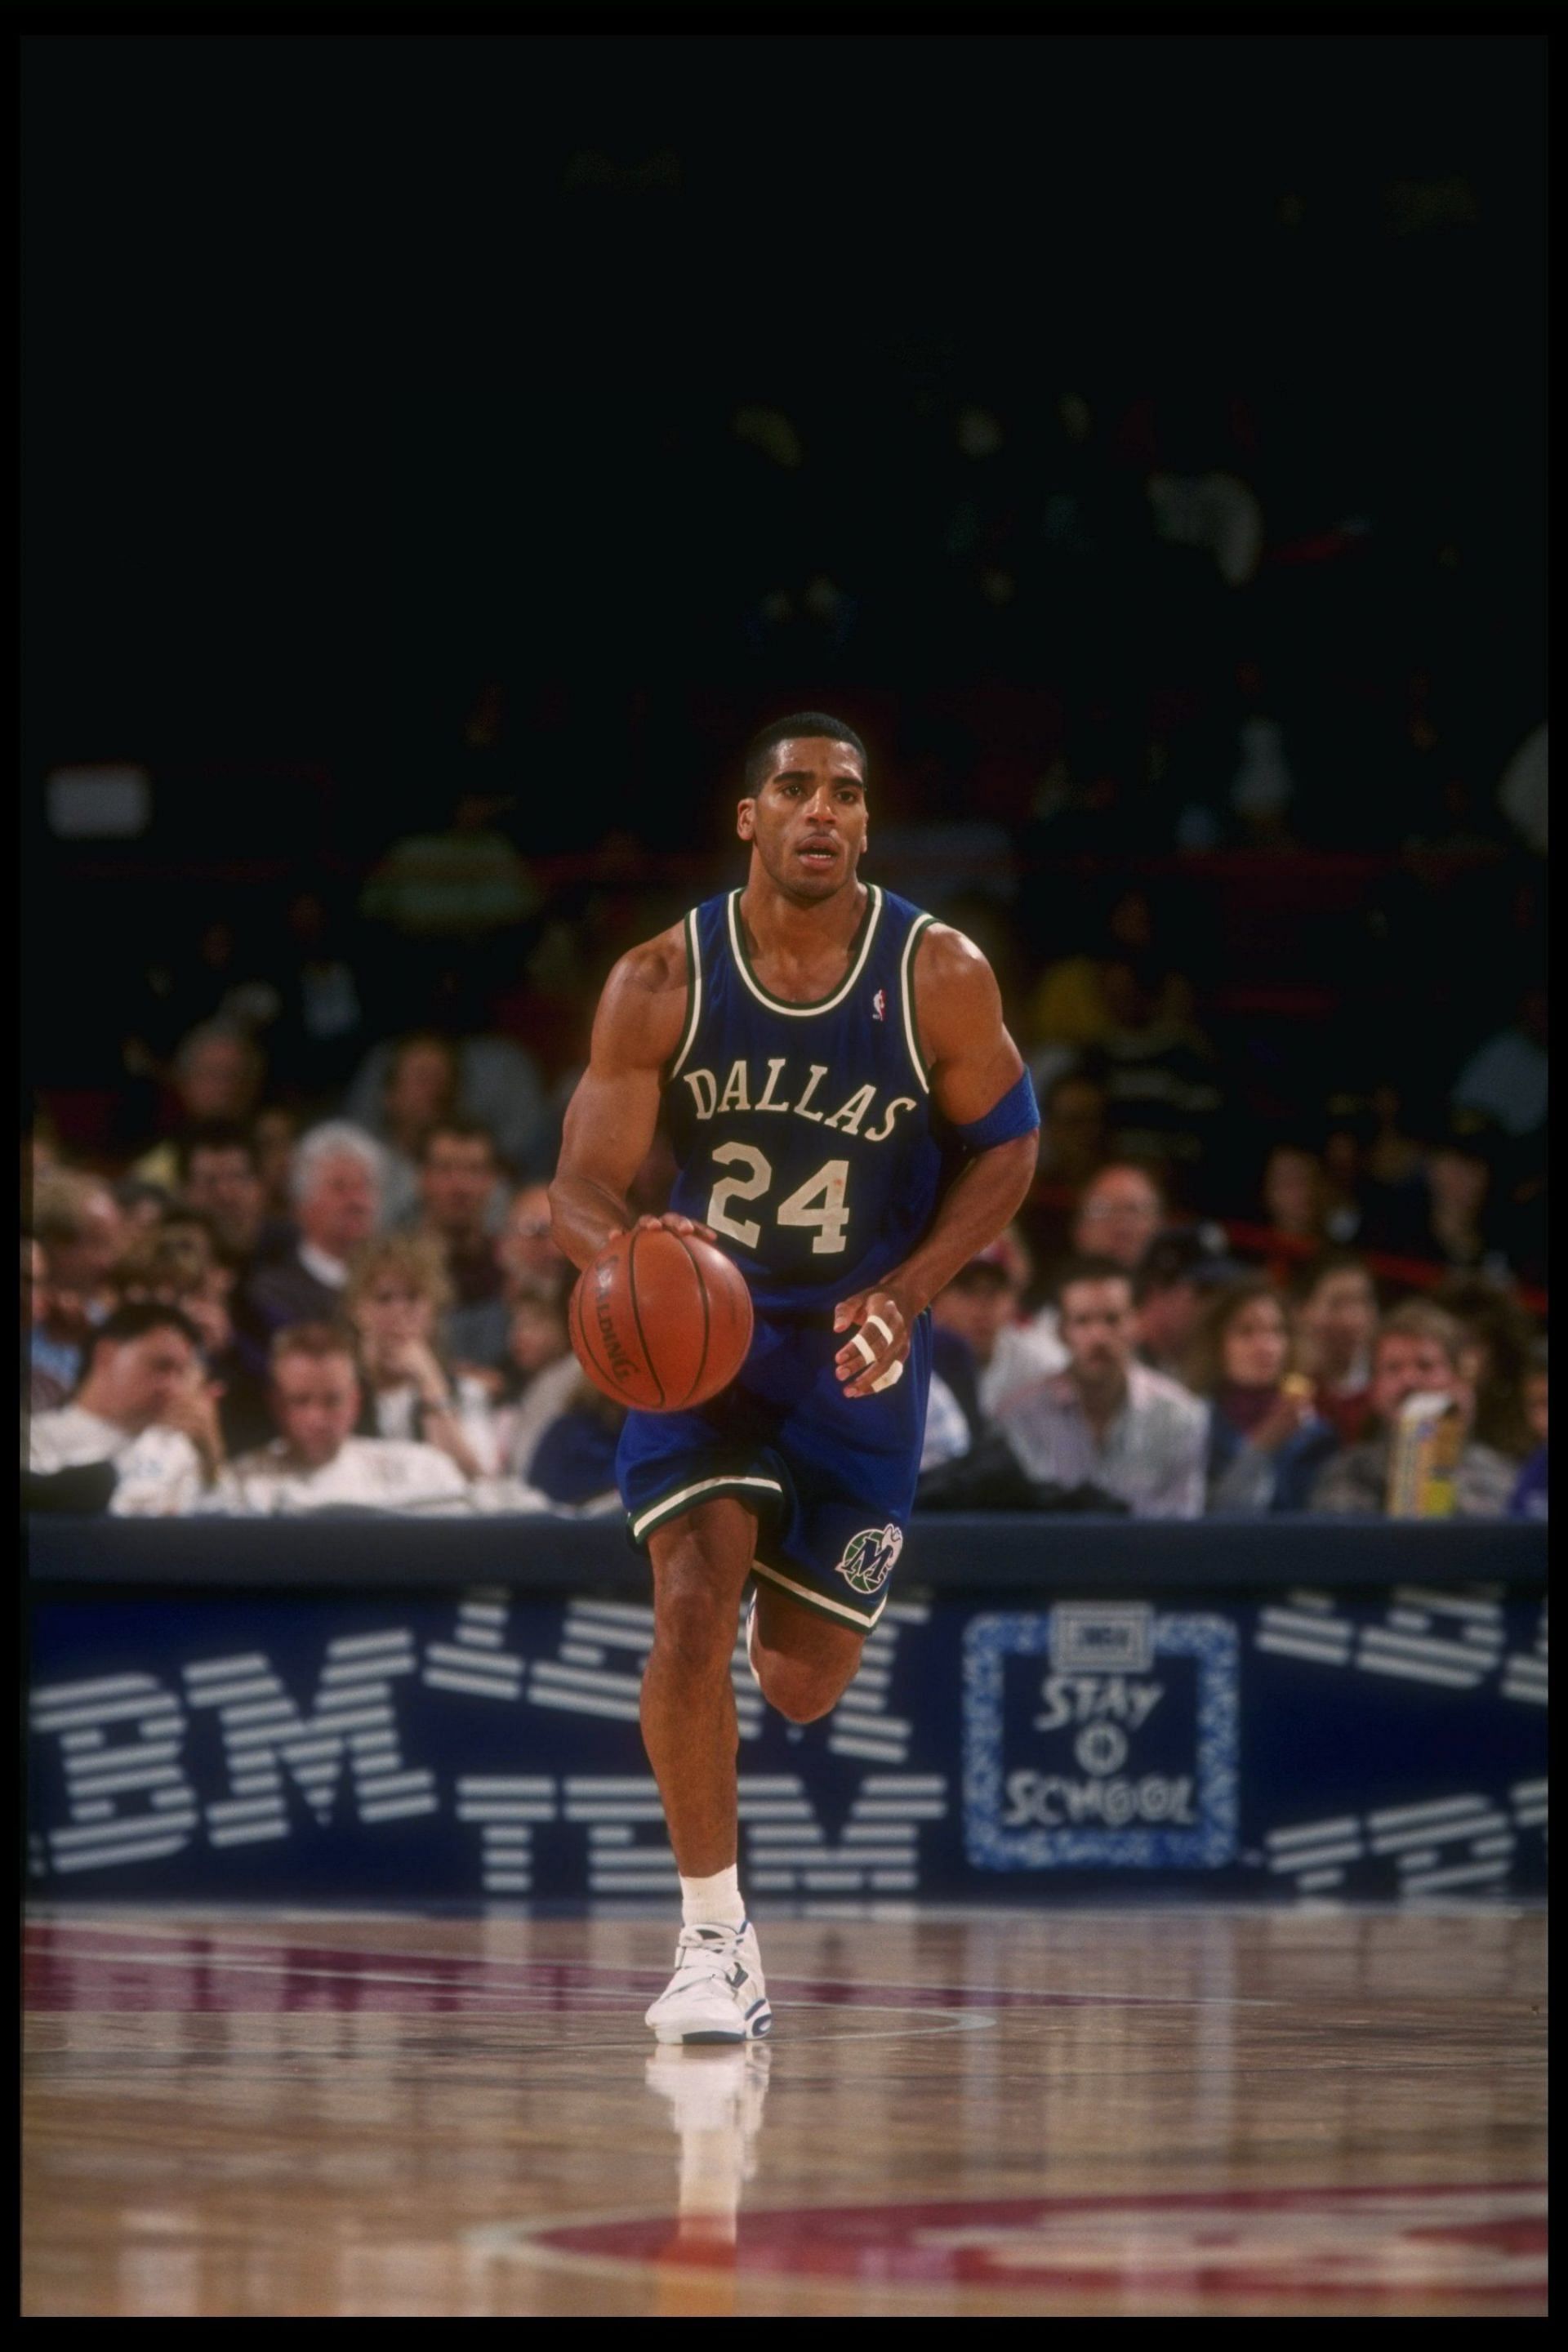 Jim Jackson had his rookie year in the 1992-93 season and averaged 16.3 ppg, 4.7 apg and 4.4 rpg.